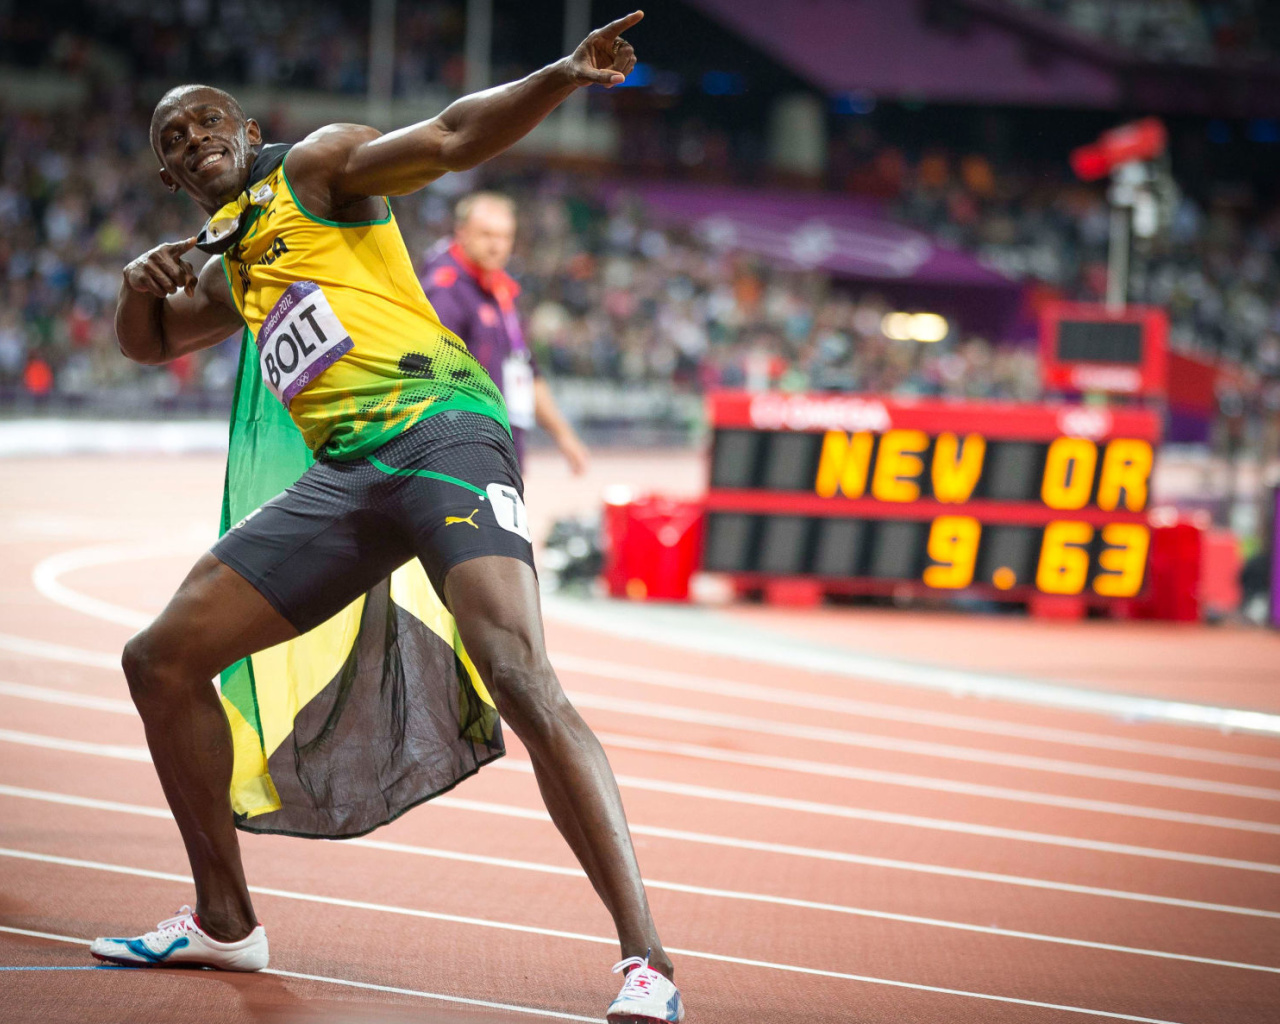 Usain Bolt won medals in the Olympics wallpaper 1280x1024